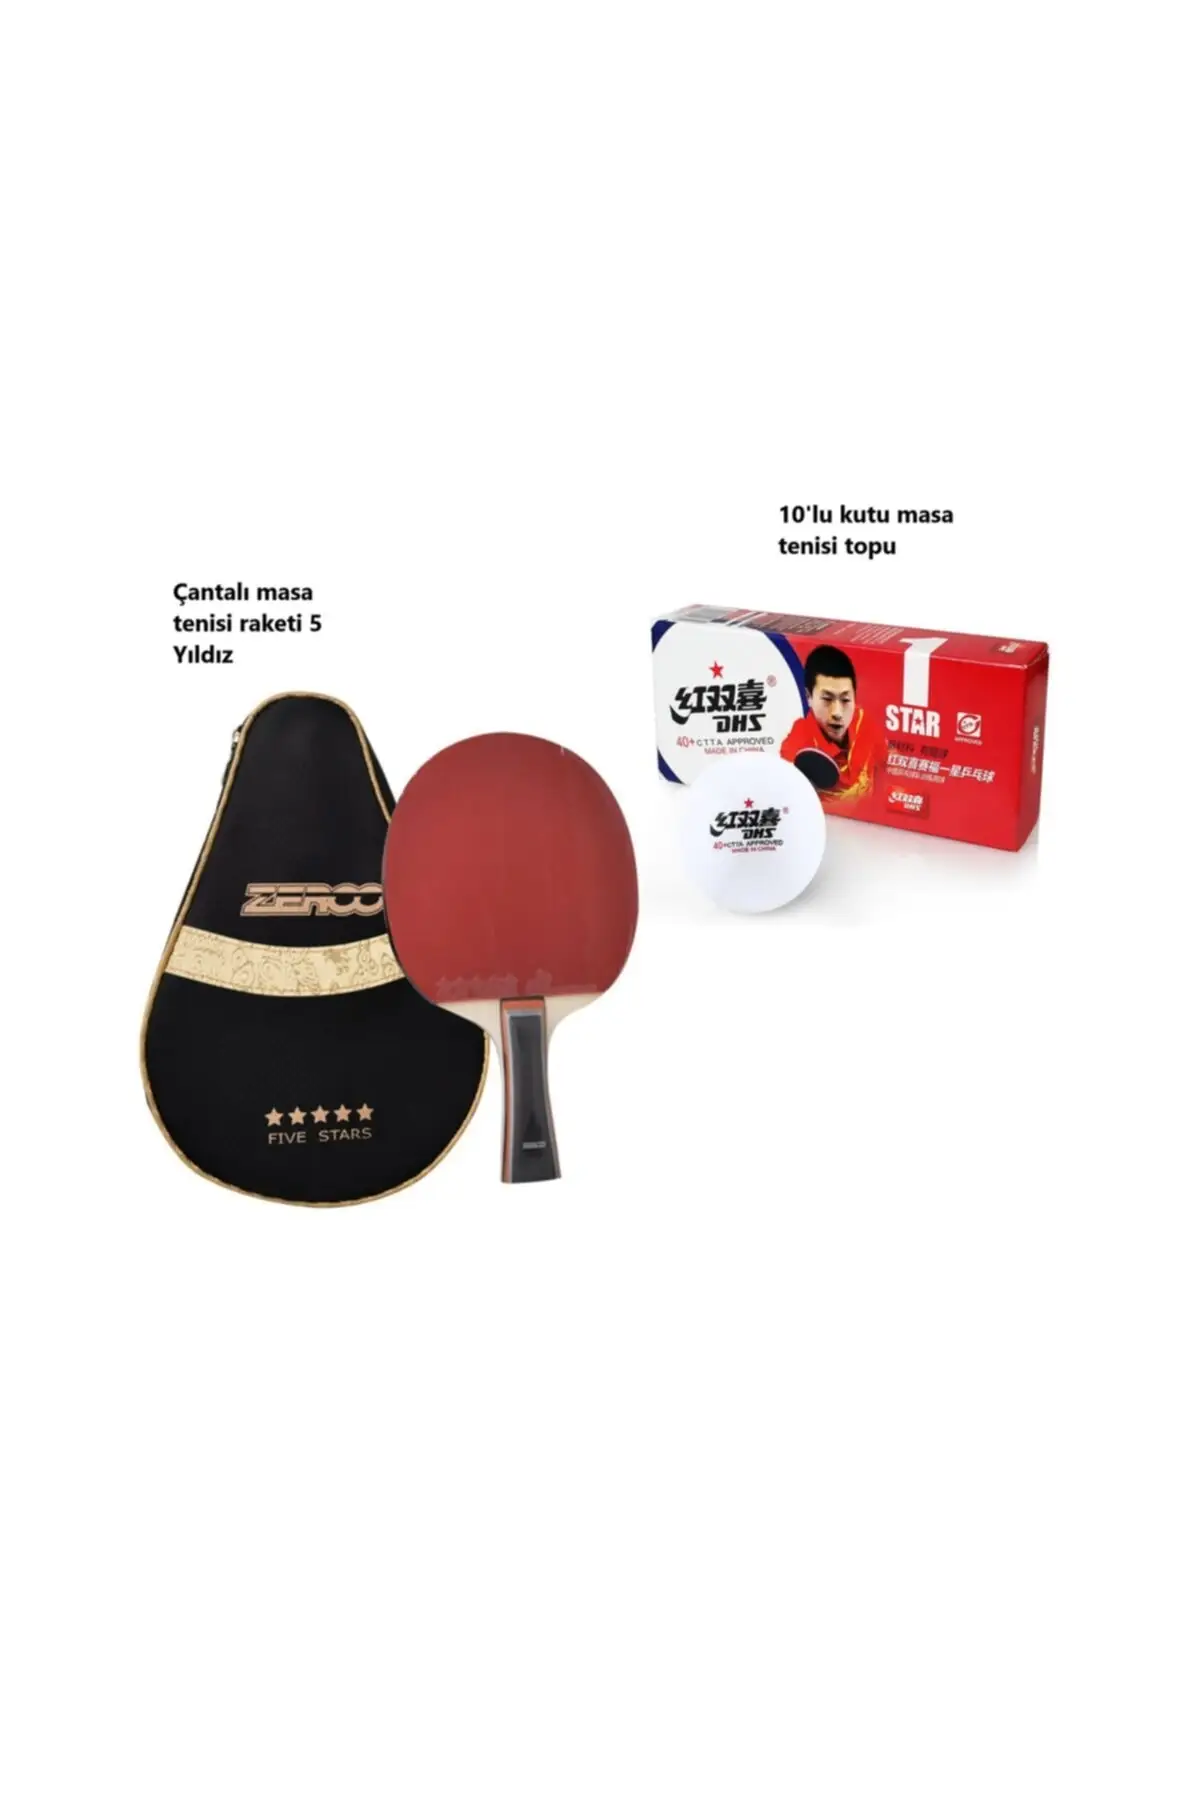 Table Tennis Racket 5 Star Bag And Dhs 1 Star 40 + 10 'lu Professional Ball Tennis Equipment & Accessories sports Outdoor